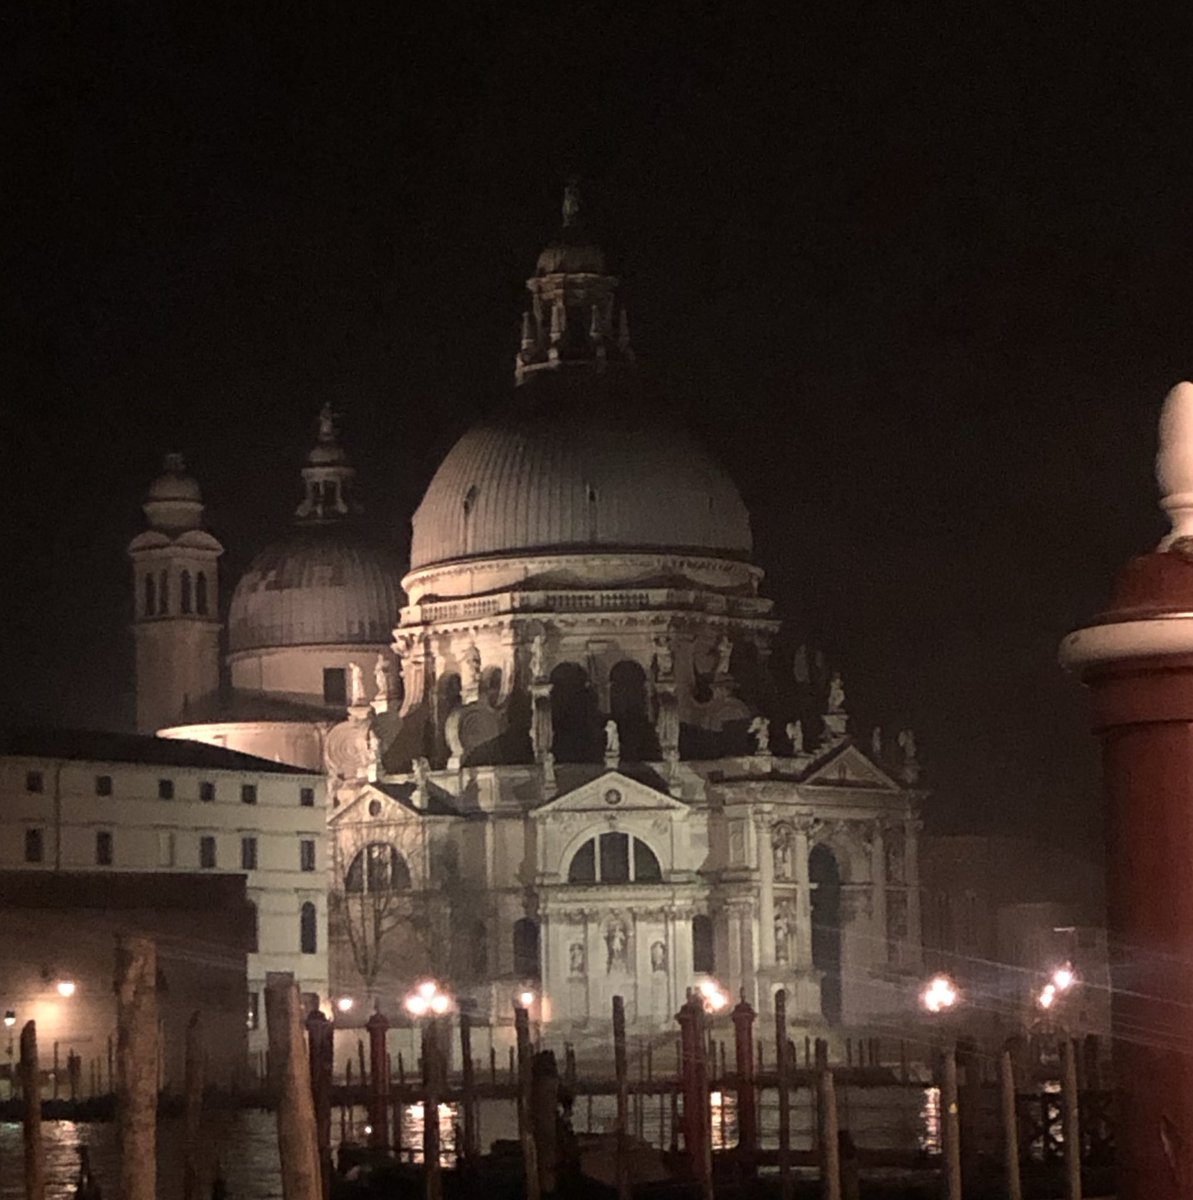 Saturday nights be like..

#venice #night #moodlighting #nofilter #iphonexcamera #pictures #picturesofinstagram #amateurphotographer #travel #travelphotography #travels #traveller #italy